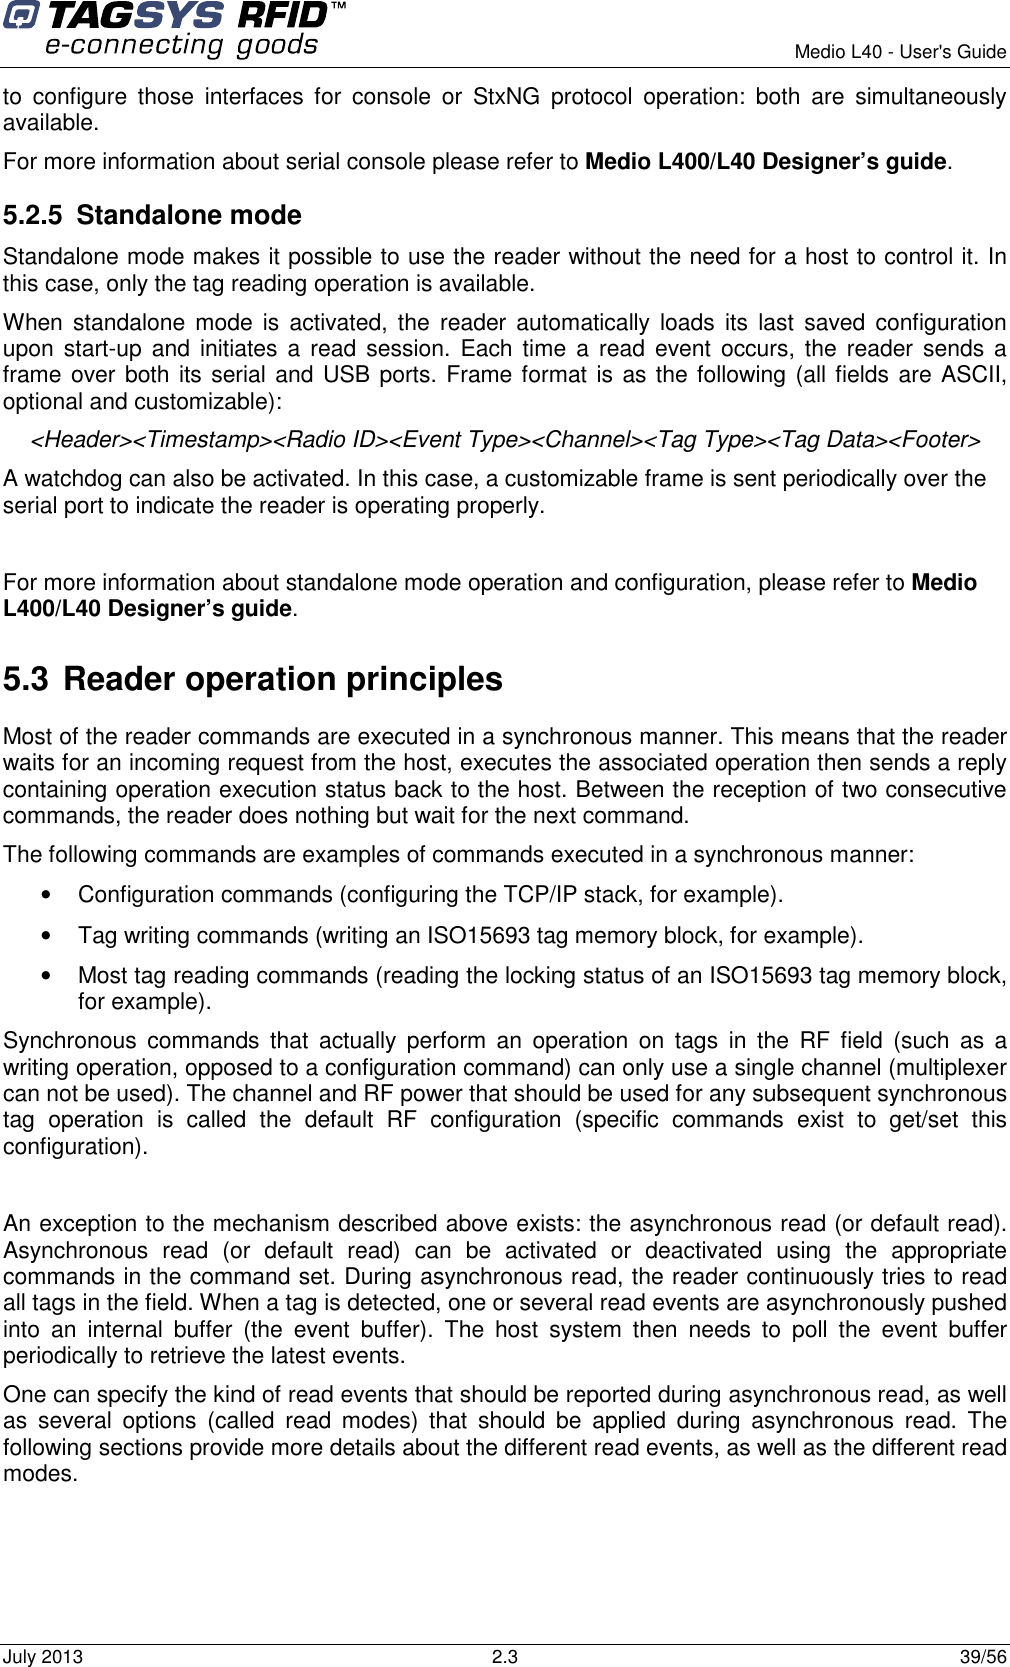        Medio L40 - User&apos;s Guide July 2013  2.3  39/56  to  configure  those  interfaces  for  console  or  StxNG  protocol  operation:  both  are  simultaneously available. For more information about serial console please refer to Medio L400/L40 Designer’s guide. 5.2.5  Standalone mode Standalone mode makes it possible to use the reader without the need for a host to control it. In this case, only the tag reading operation is available. When  standalone  mode is activated, the  reader automatically  loads  its  last  saved  configuration upon start-up and initiates a read  session.  Each time  a  read  event occurs,  the reader sends  a frame over both its serial and USB ports. Frame format is as the following (all fields are ASCII, optional and customizable): &lt;Header&gt;&lt;Timestamp&gt;&lt;Radio ID&gt;&lt;Event Type&gt;&lt;Channel&gt;&lt;Tag Type&gt;&lt;Tag Data&gt;&lt;Footer&gt; A watchdog can also be activated. In this case, a customizable frame is sent periodically over the serial port to indicate the reader is operating properly.  For more information about standalone mode operation and configuration, please refer to Medio L400/L40 Designer’s guide. 5.3 Reader operation principles Most of the reader commands are executed in a synchronous manner. This means that the reader waits for an incoming request from the host, executes the associated operation then sends a reply containing operation execution status back to the host. Between the reception of two consecutive commands, the reader does nothing but wait for the next command. The following commands are examples of commands executed in a synchronous manner: •  Configuration commands (configuring the TCP/IP stack, for example). •  Tag writing commands (writing an ISO15693 tag memory block, for example). •  Most tag reading commands (reading the locking status of an ISO15693 tag memory block, for example). Synchronous  commands  that  actually  perform  an  operation  on  tags  in  the  RF  field  (such  as  a writing operation, opposed to a configuration command) can only use a single channel (multiplexer can not be used). The channel and RF power that should be used for any subsequent synchronous tag  operation  is  called  the  default  RF  configuration  (specific  commands  exist  to  get/set  this configuration).  An exception to the mechanism described above exists: the asynchronous read (or default read).  Asynchronous  read  (or  default  read)  can  be  activated  or  deactivated  using  the  appropriate commands in the command set. During asynchronous read, the reader continuously tries to read all tags in the field. When a tag is detected, one or several read events are asynchronously pushed into  an  internal  buffer  (the  event  buffer).  The  host  system  then  needs  to  poll  the  event  buffer periodically to retrieve the latest events. One can specify the kind of read events that should be reported during asynchronous read, as well as  several  options  (called  read  modes)  that  should  be  applied  during  asynchronous  read.  The following sections provide more details about the different read events, as well as the different read modes. 